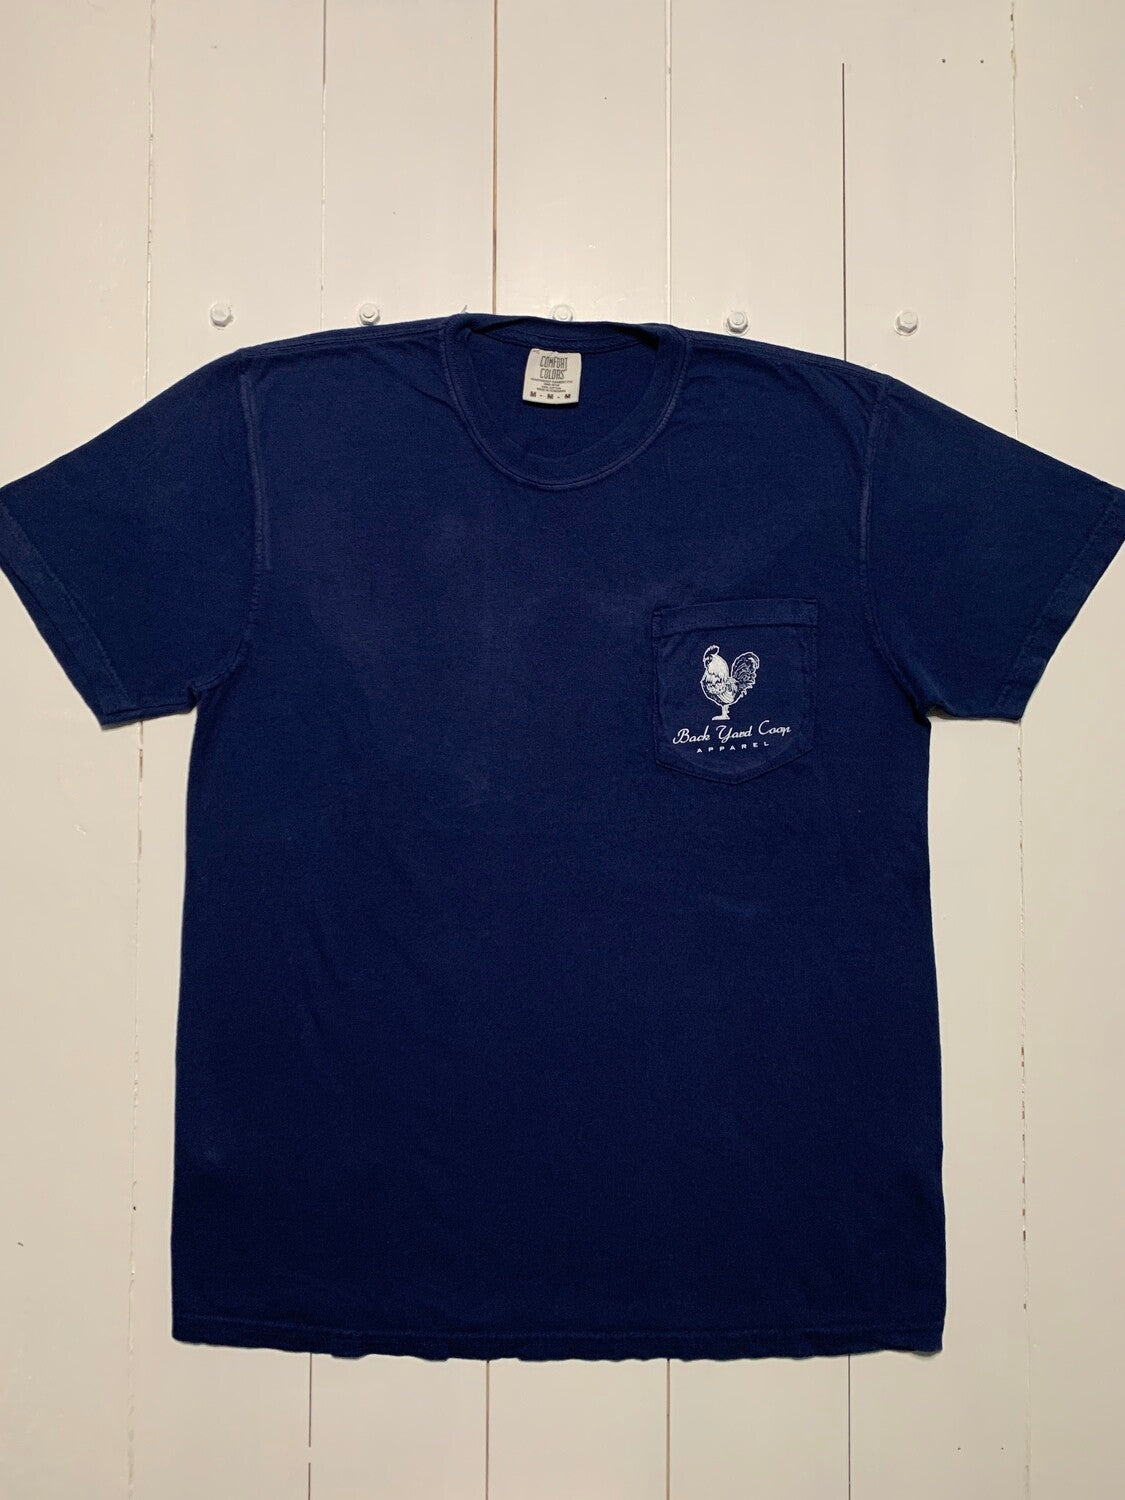 Over Under Youth Retriever Club Short Sleeve Tee Shirt Navy Blue yl -  Southern Clothing